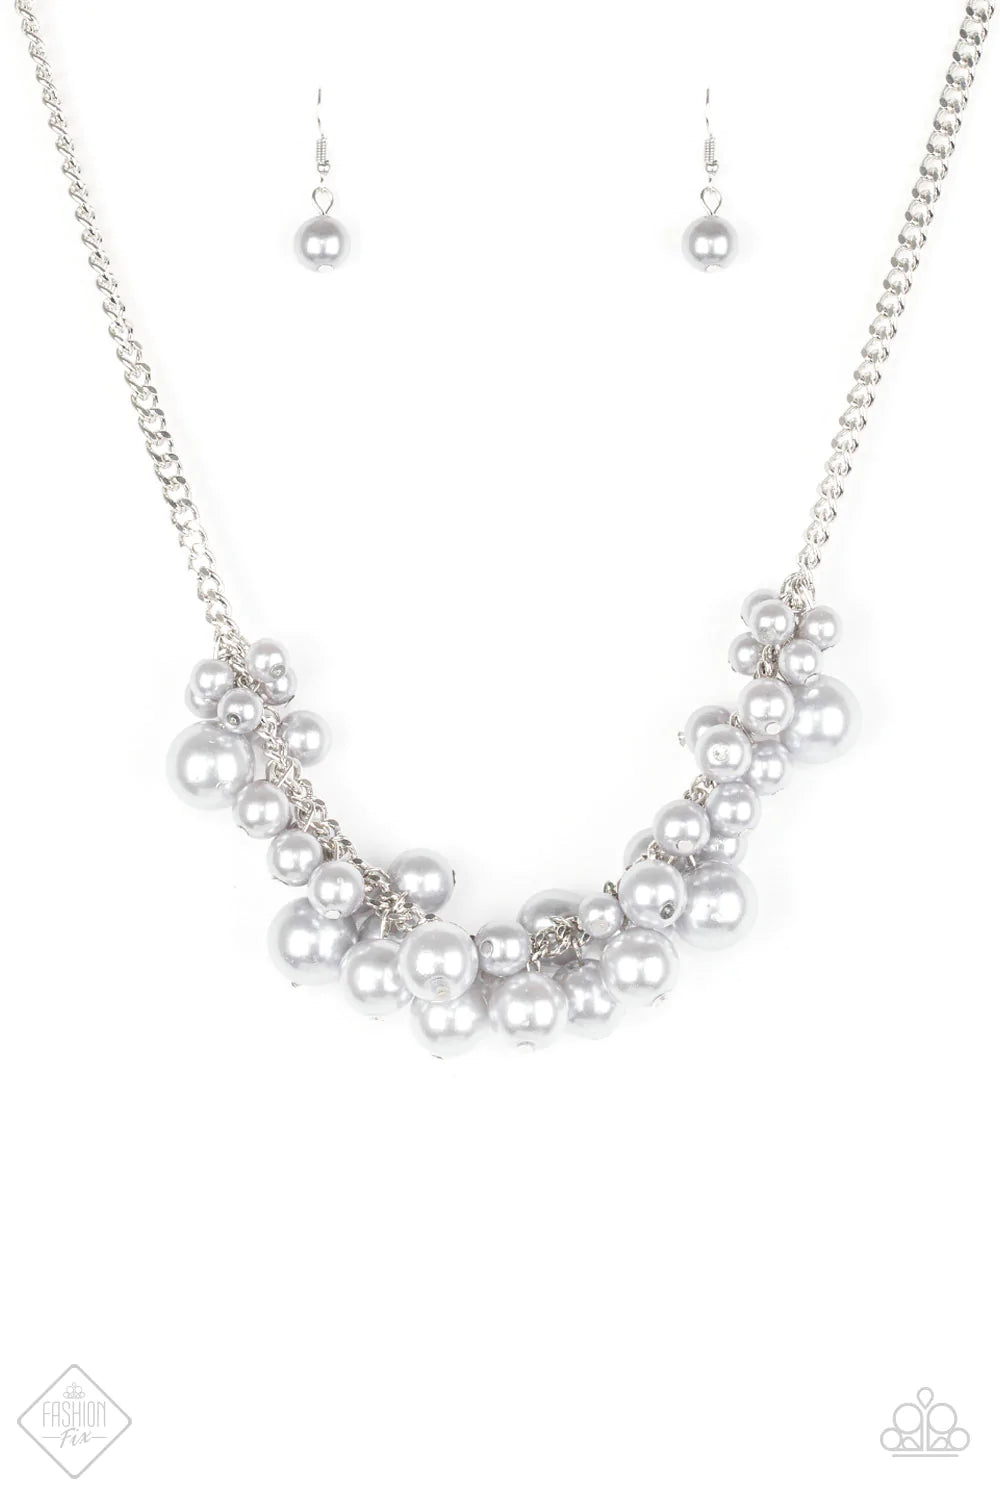 Paparazzi Necklace ~ Glam Queen  - Silver